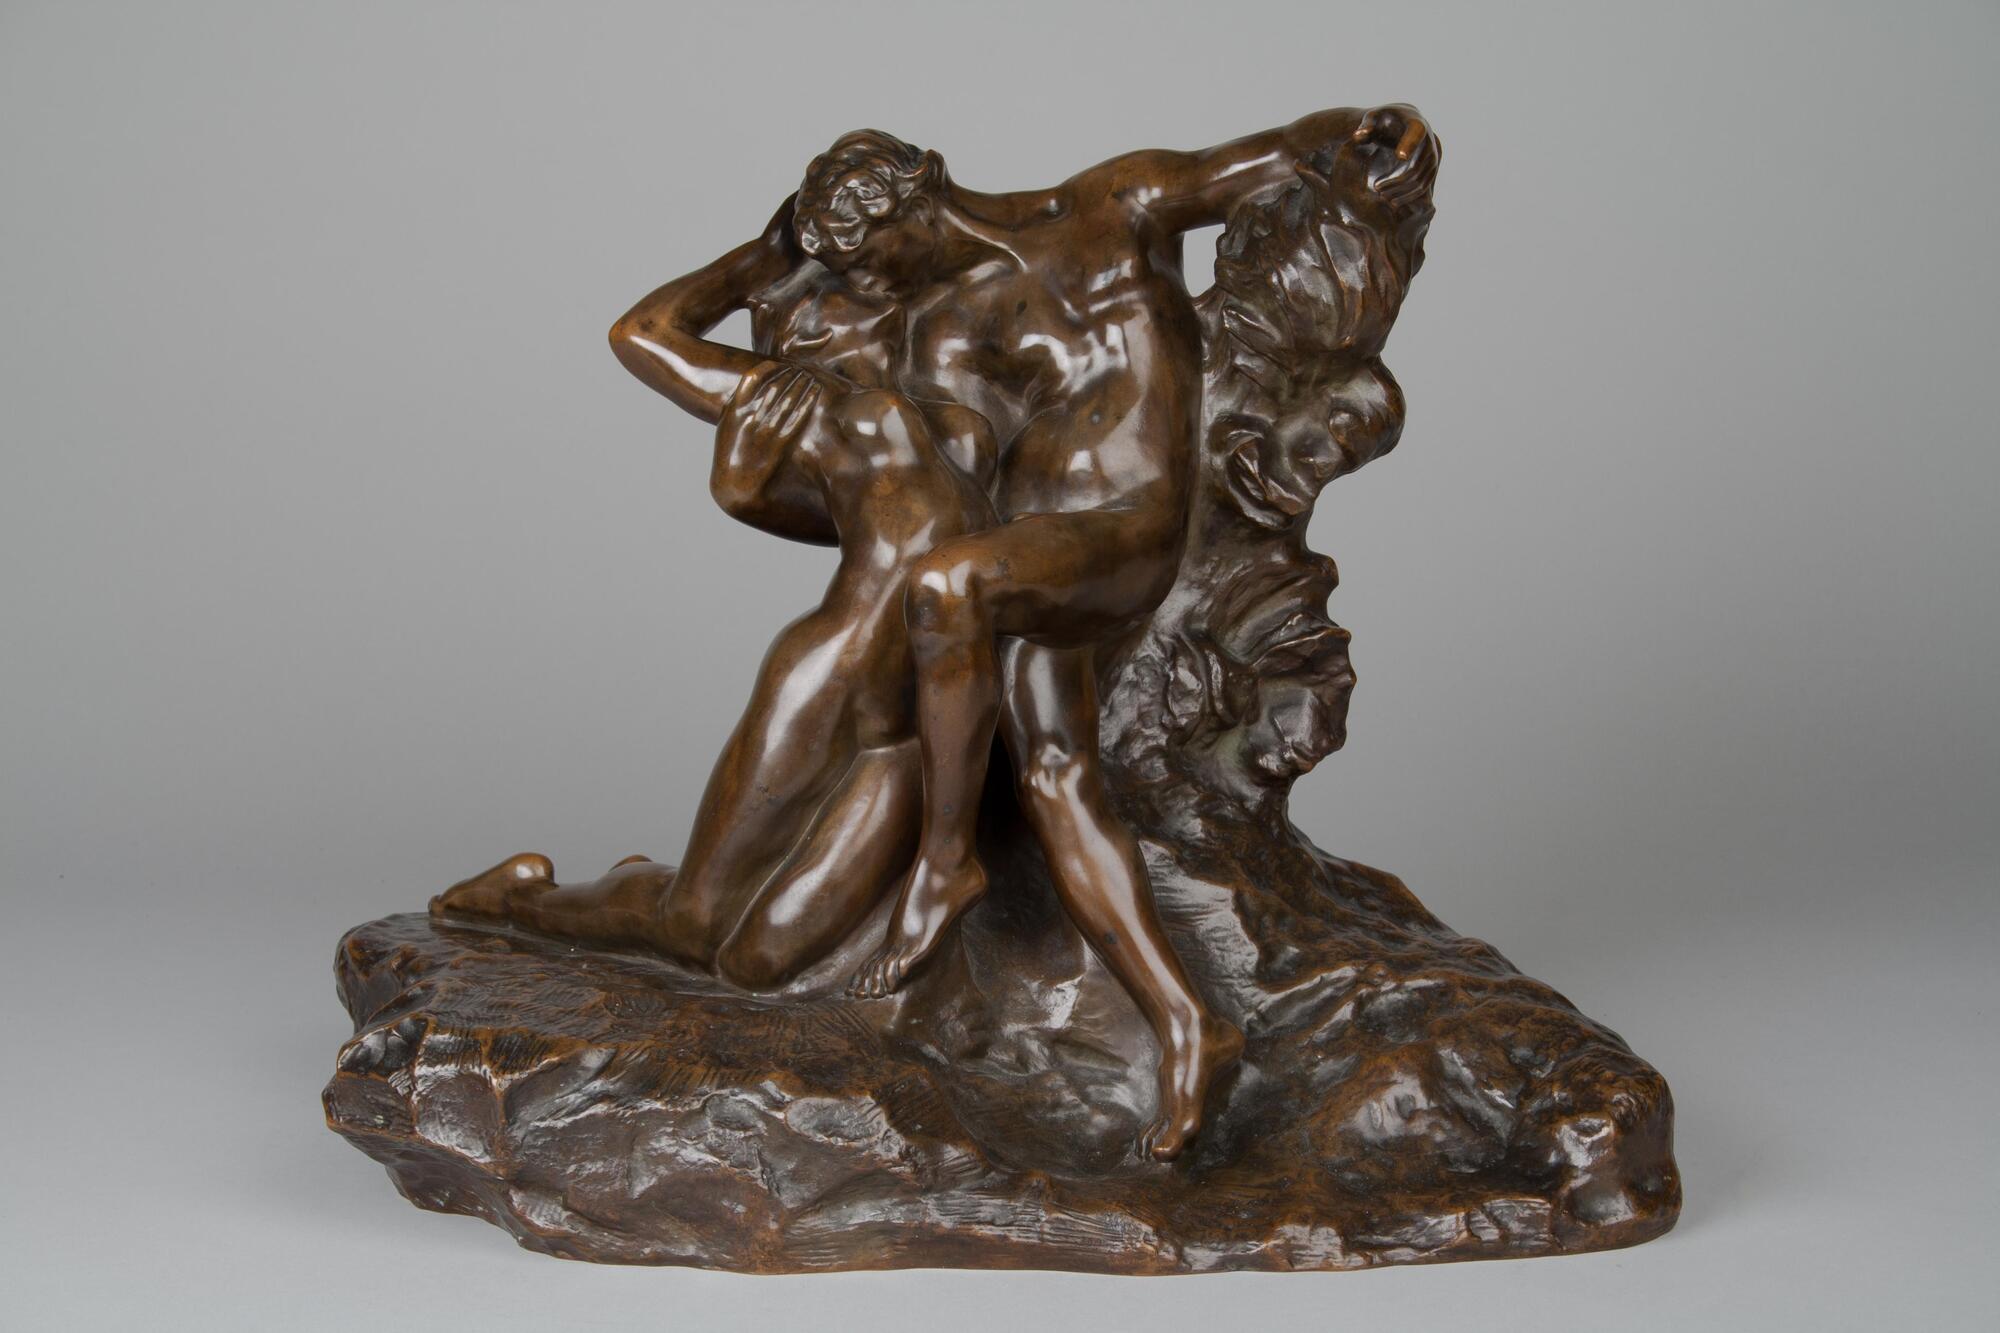 Two nude figures embrace and kiss. The man is seated with his legs crossed as he bends to the side to embrace the woman, his arm under her shoulders. The woman, kneeling beside the man, arches upward and backwards to meet the bending figure of the man. The smooth modeling of the figures is contrasted by the more agitated modeling of the base and the support on which the man sits.